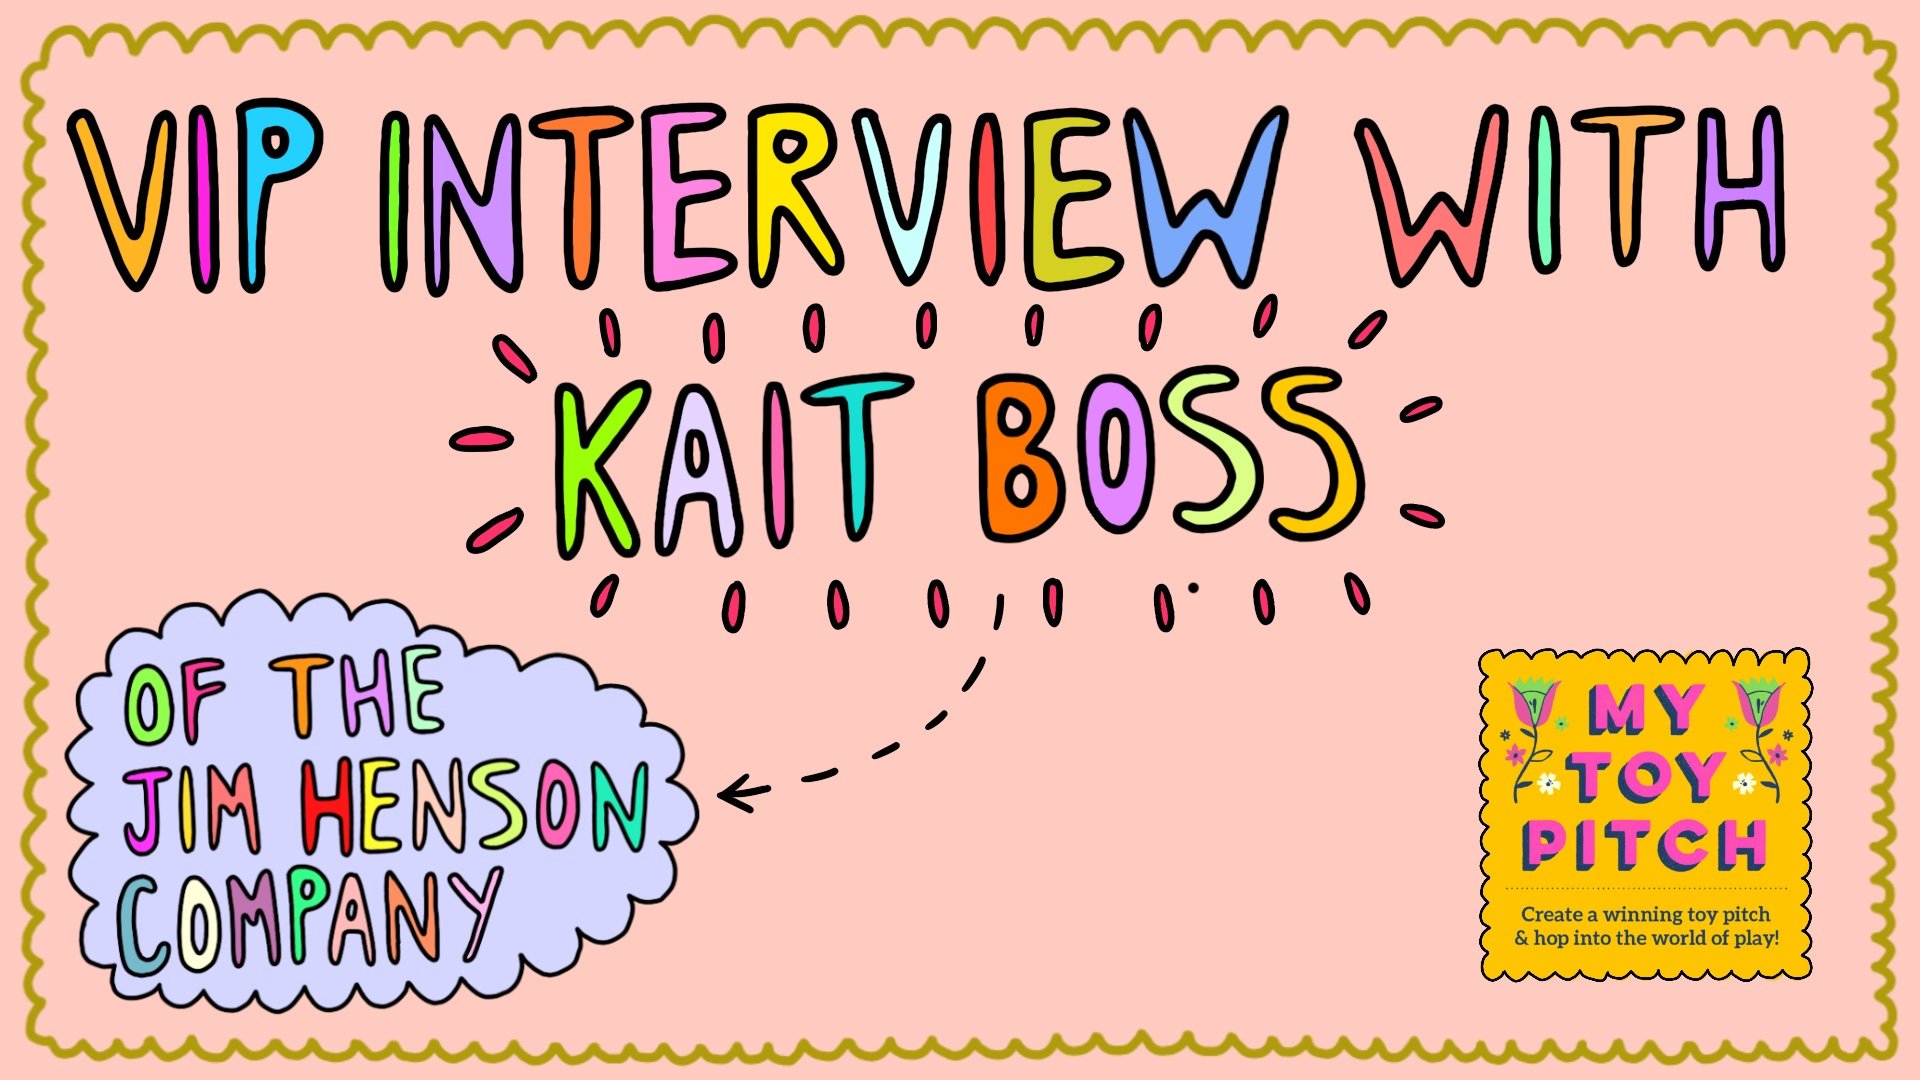  Cover image for a video of an interview with Kait Boss of the Jim Henson Company, from Make Art That Sells: My Toy Pitch e-course. 